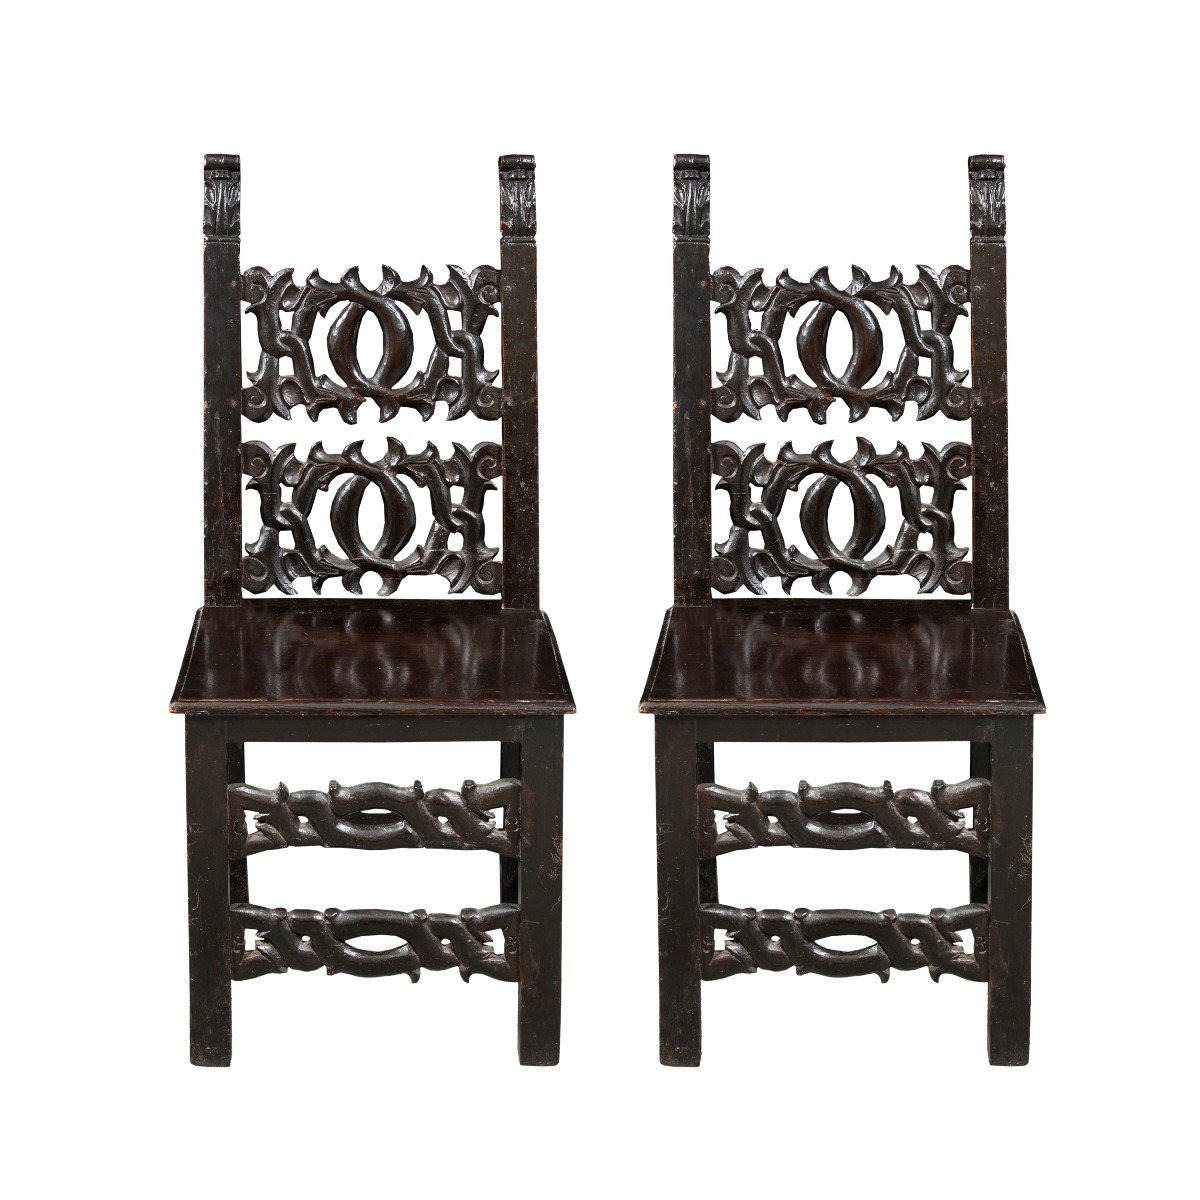 Pair Of Carved Wooden Refectory Chairs. Modena, 19th Century.